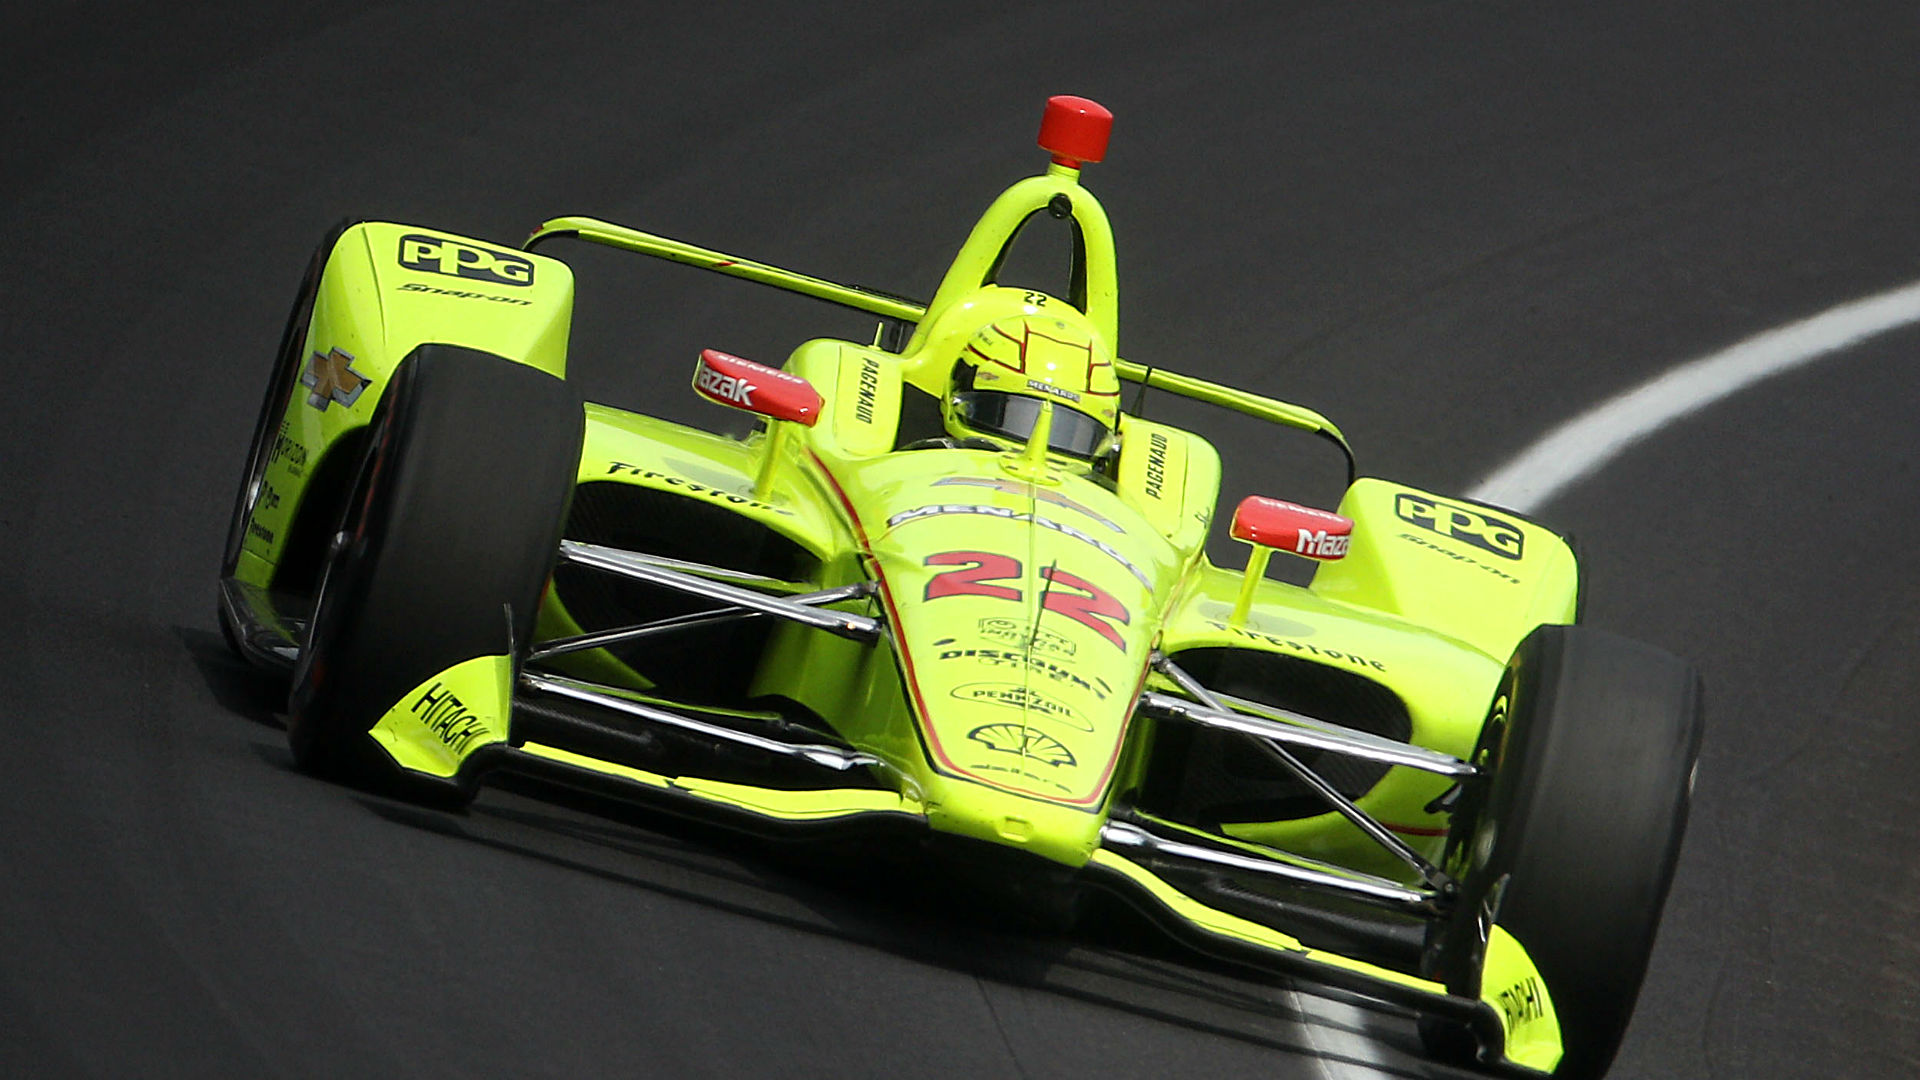 Indy 500: Live race updates, results, highlights from Indianapolis